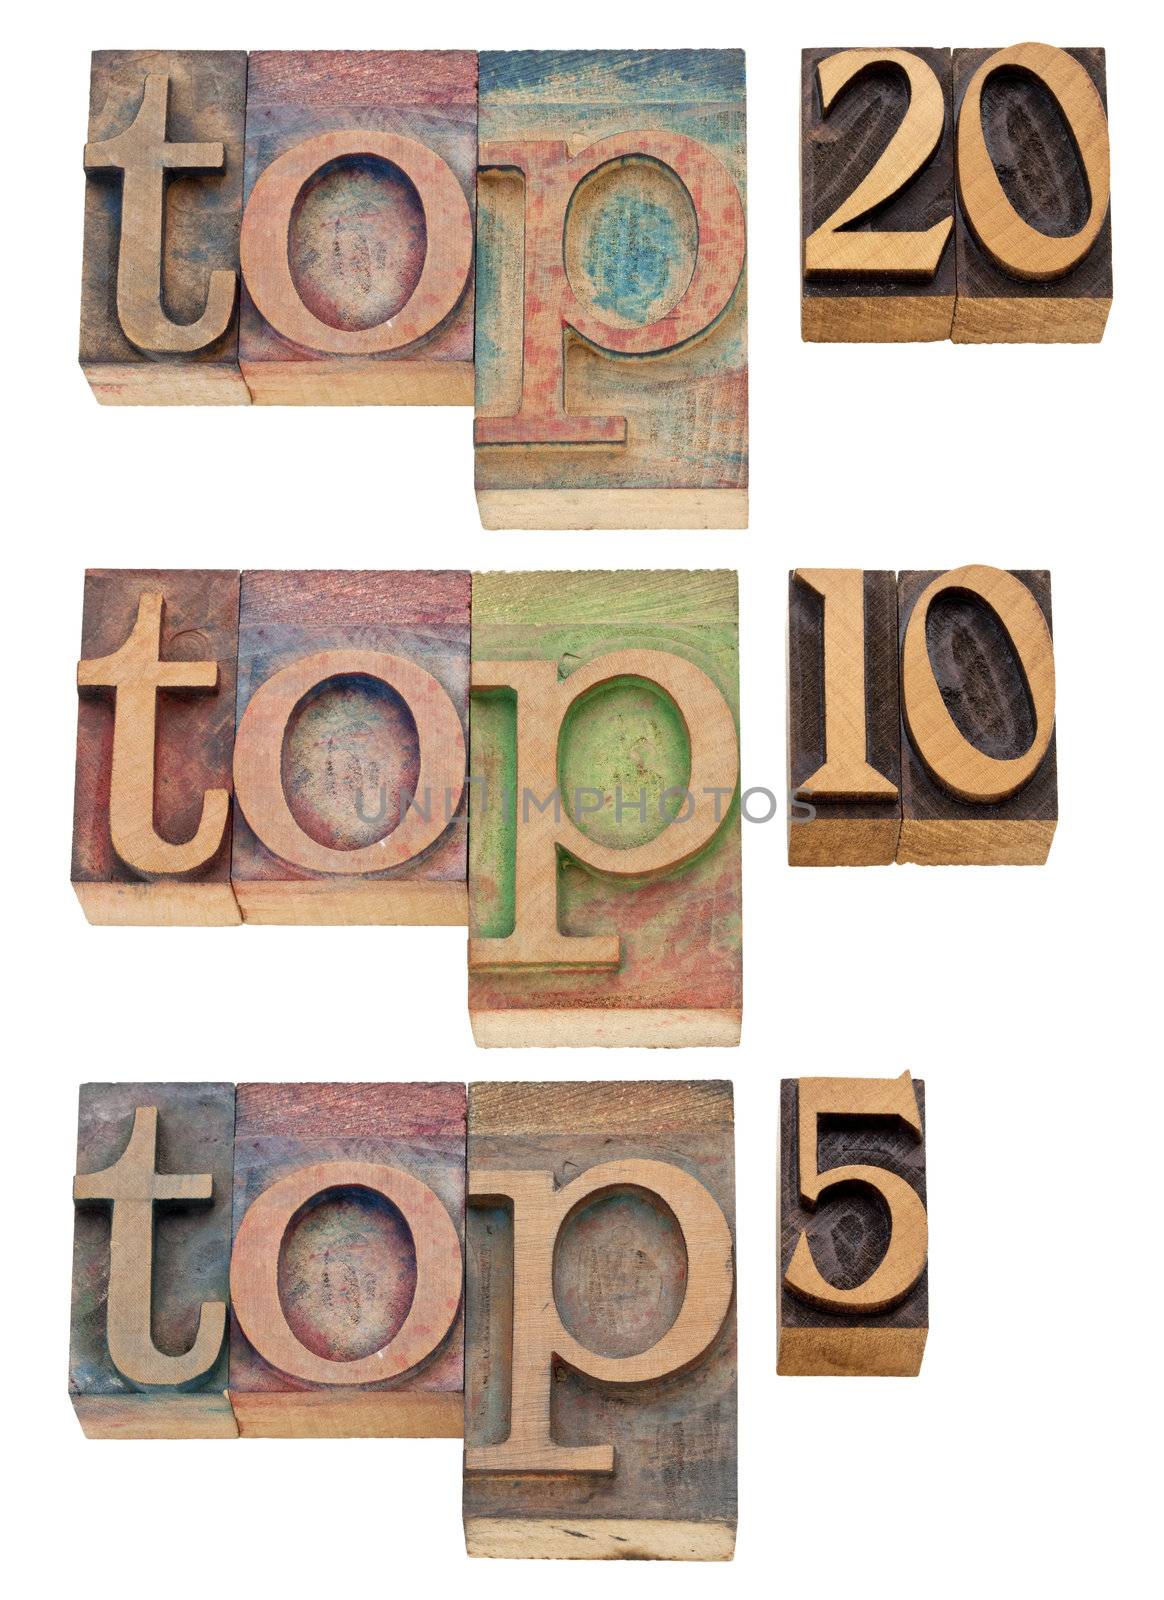 top 20, top 10, top 5 - popularity concept - isolated text in vintage wood letterpress printing blocks